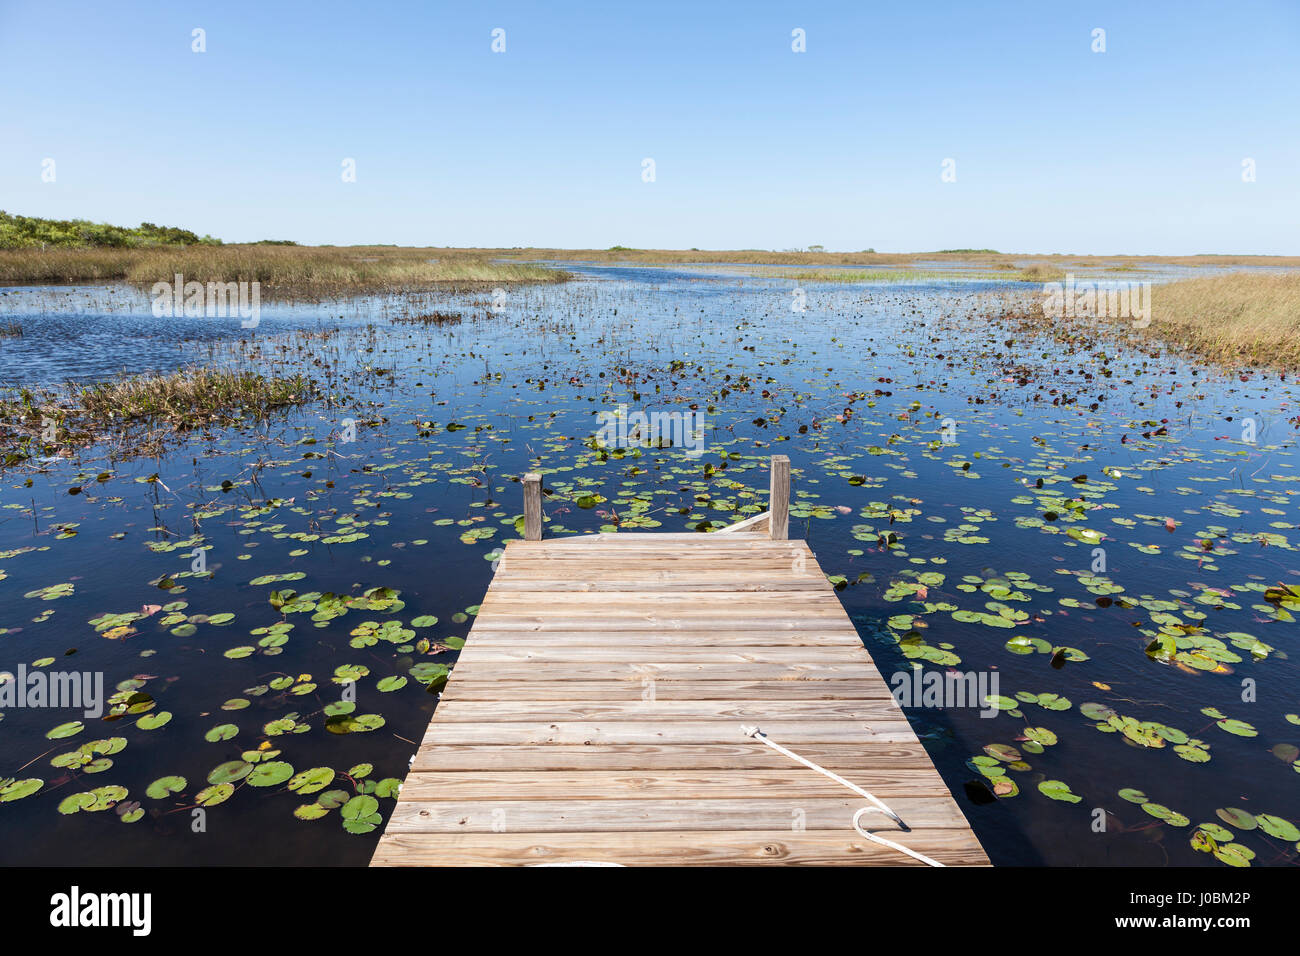 Swamp landscape in the Everglades National Park in Florida, United States Stock Photo